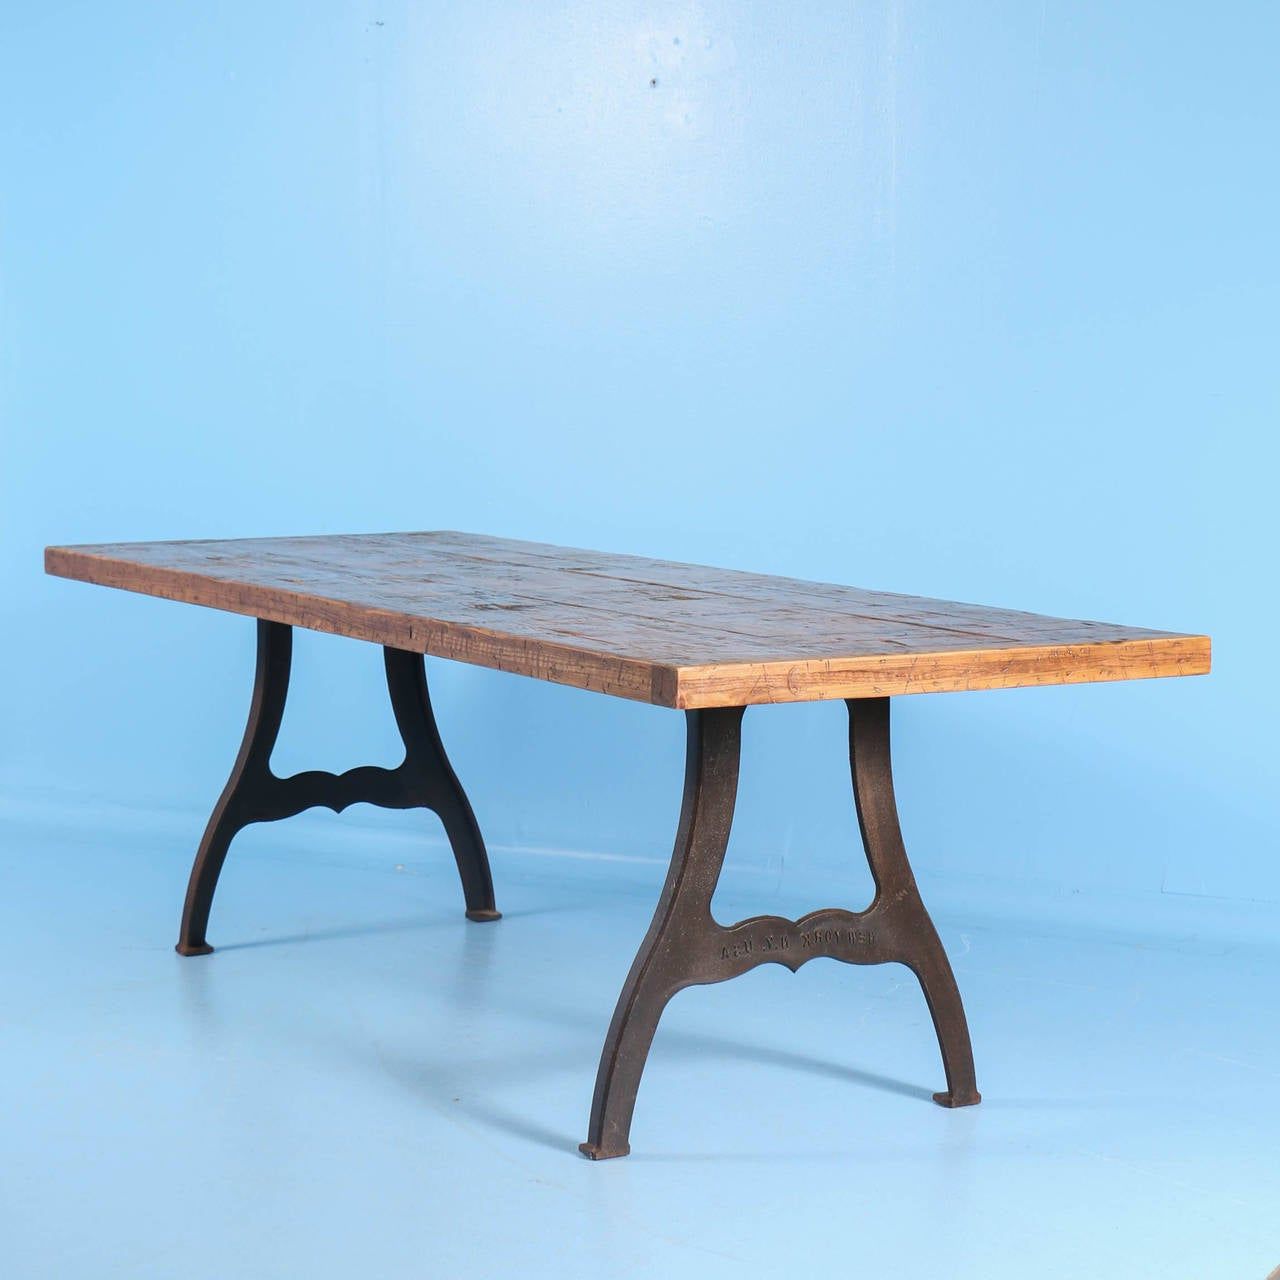 Reclaimed Teak And Cast Iron Round Dining Tables Intended For Preferred Vintage Industrial Look Dining Table From Reclaimed Wood (View 9 of 20)